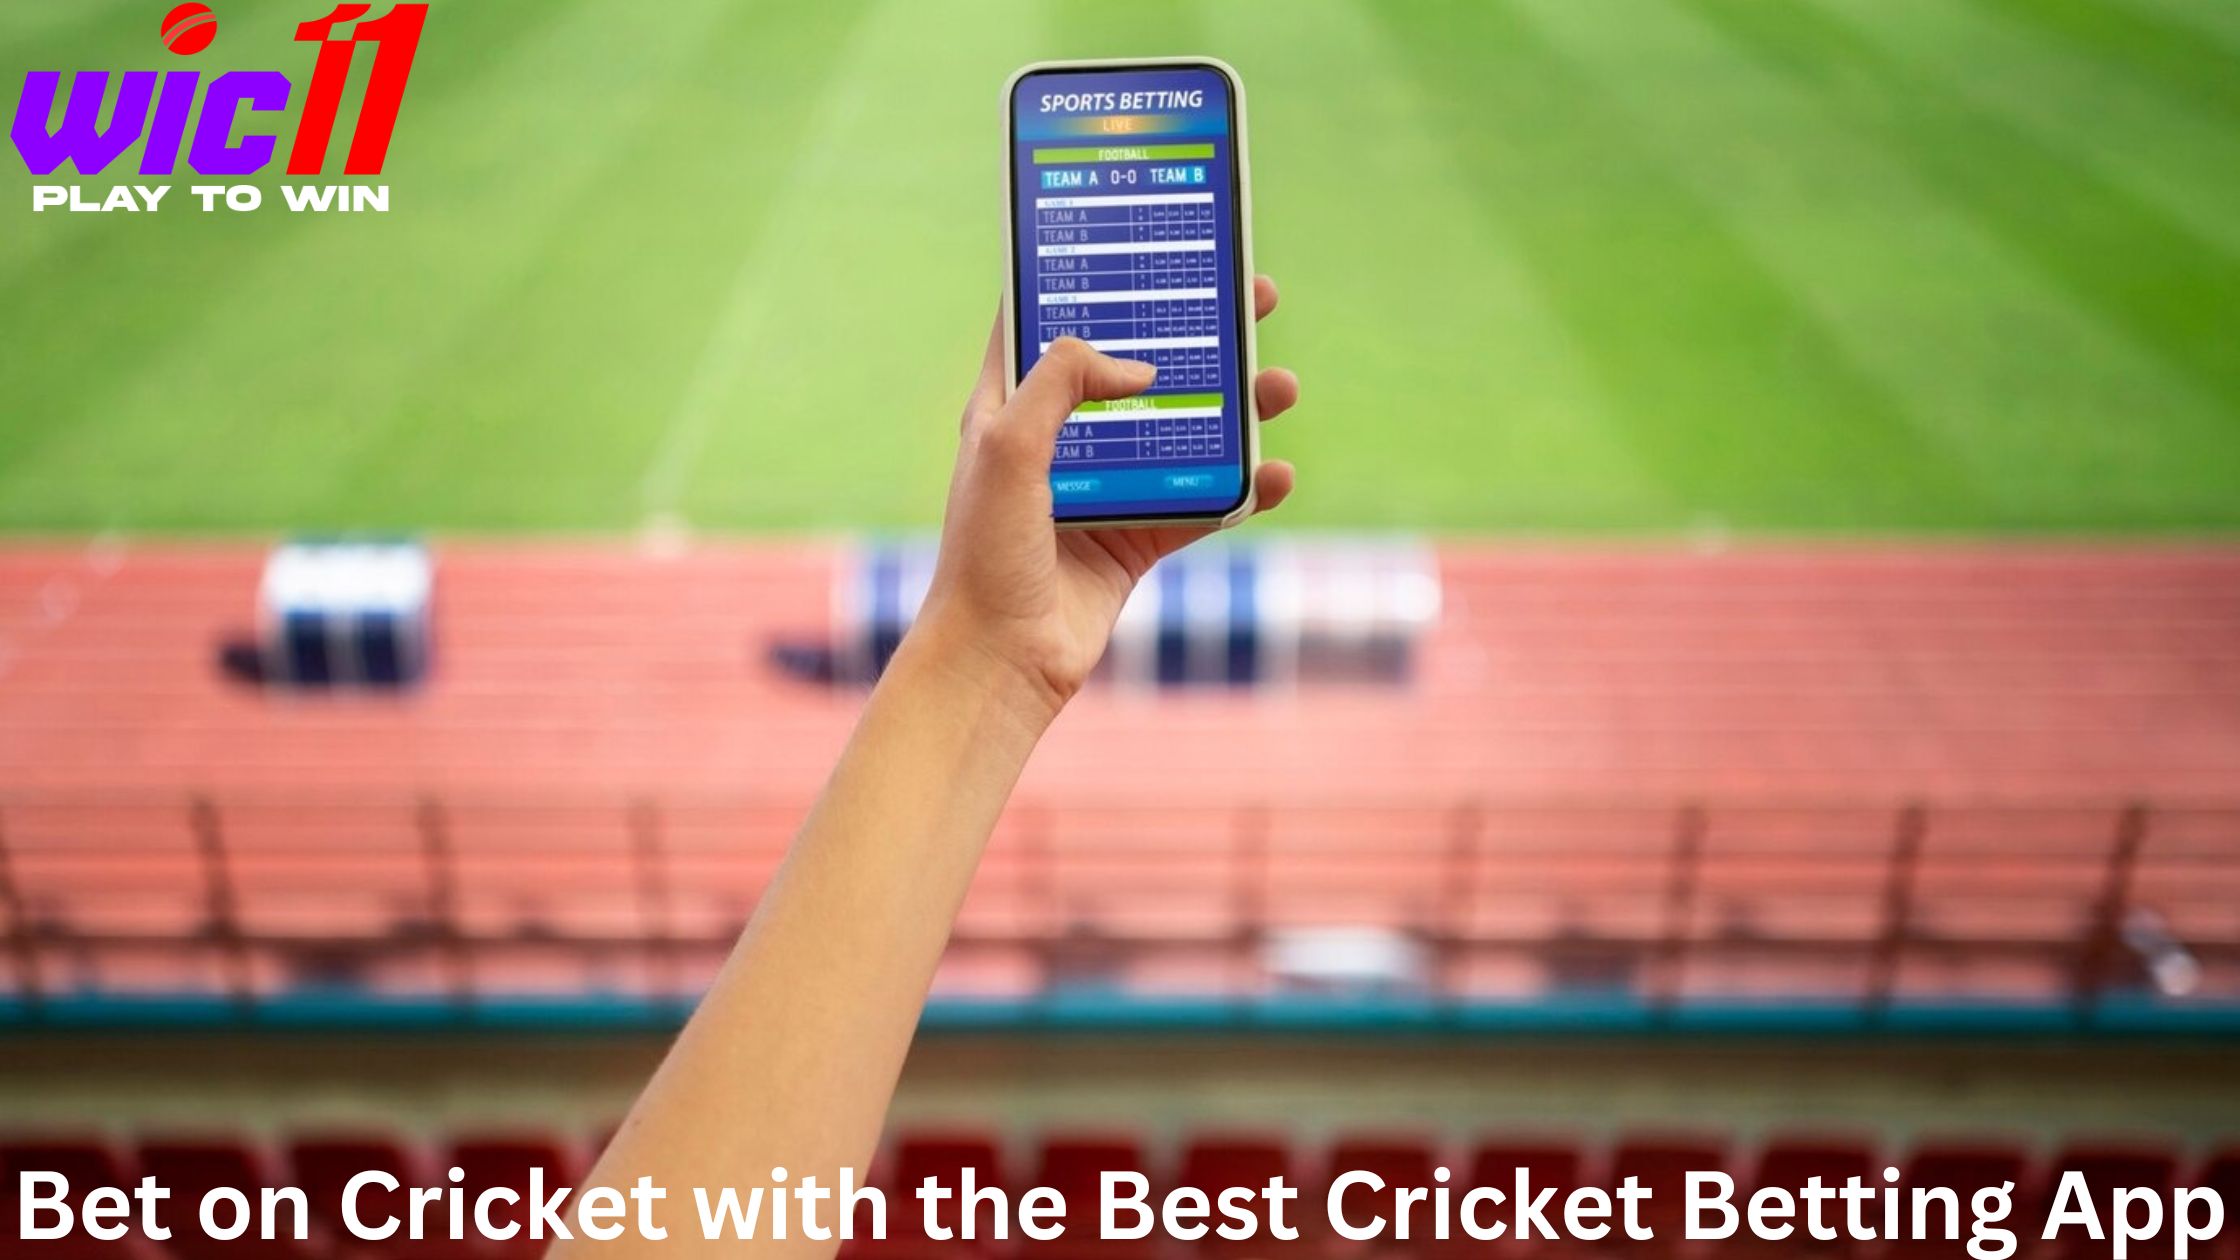 Bet on Cricket with the Best Cricket Betting App- Wic11 App